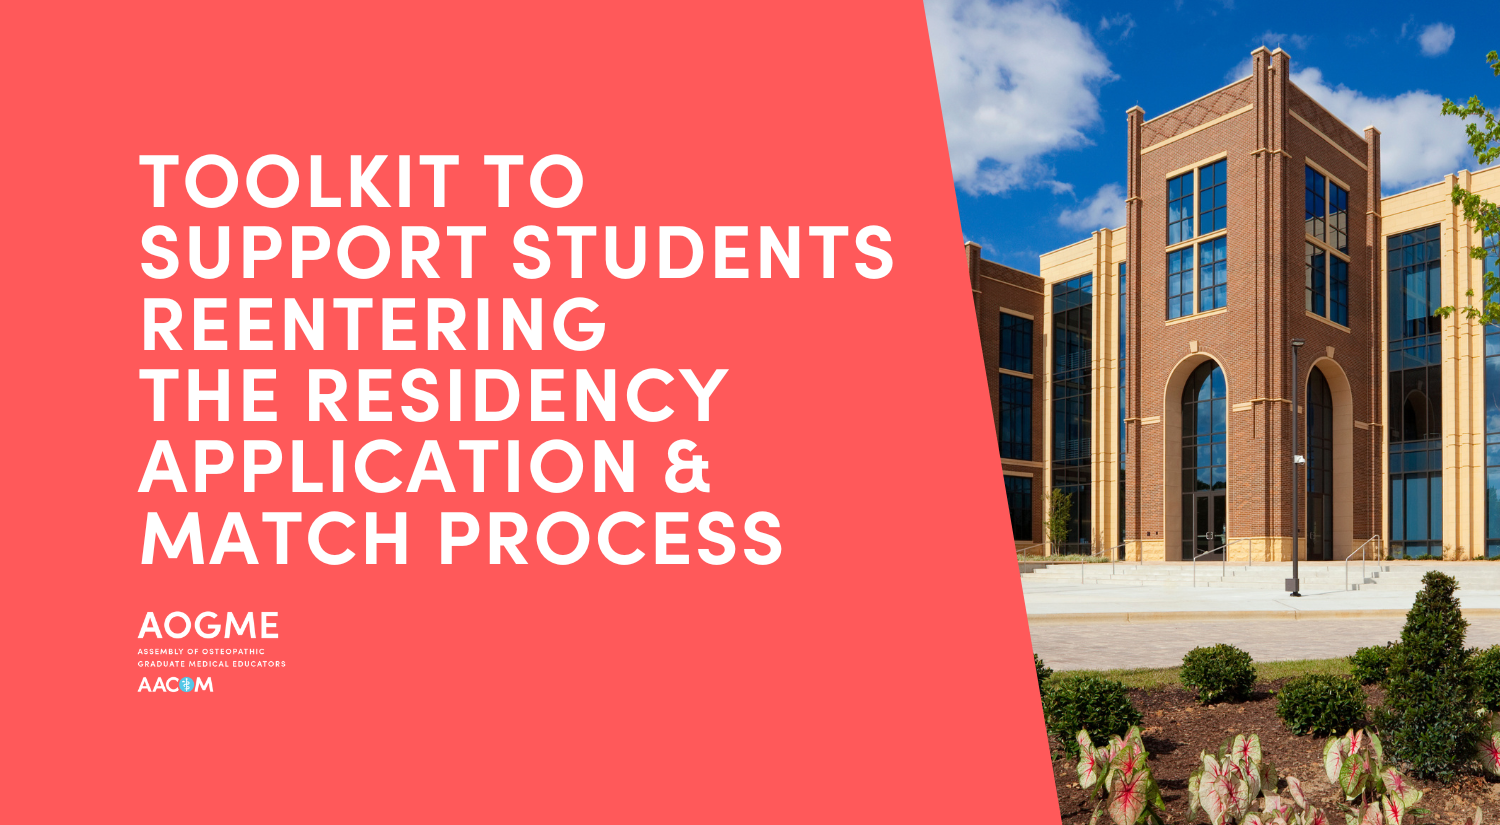 AOGME Toolkit to support students reentering residency